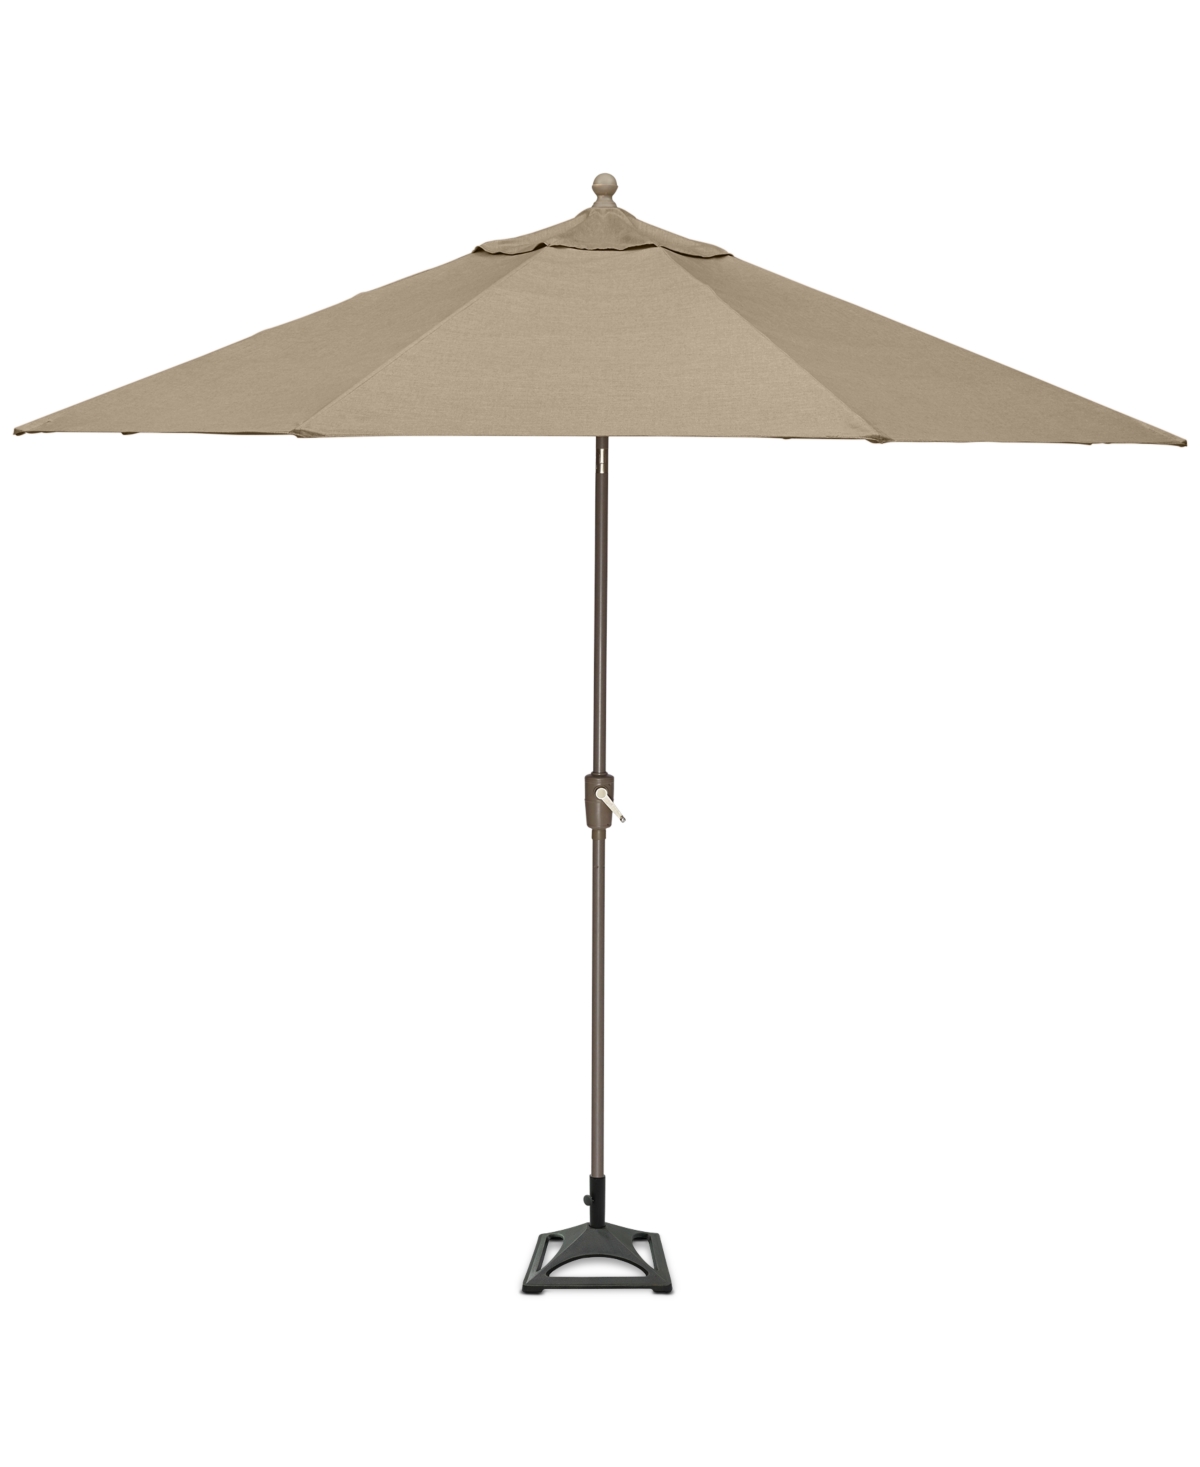 Agio Wayland Outdoor 11' Umbrella And Base, Created For Macy's In Outdura Remy Pebble